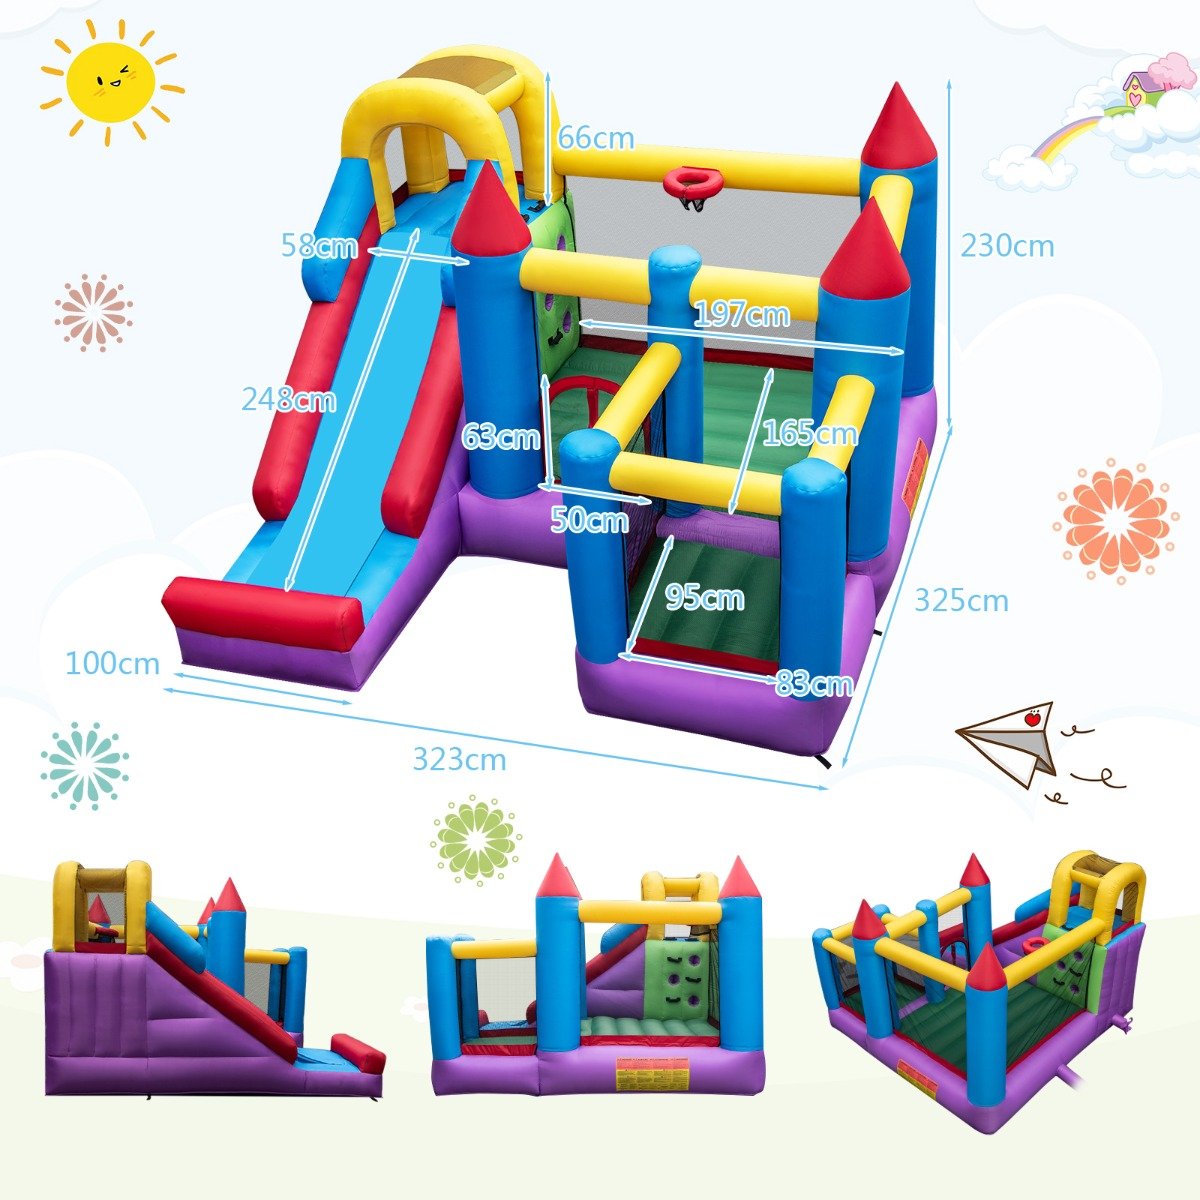 5-in-1 Inflatable Adventure - Slide, Trampoline & Play Zone (Blower Included)